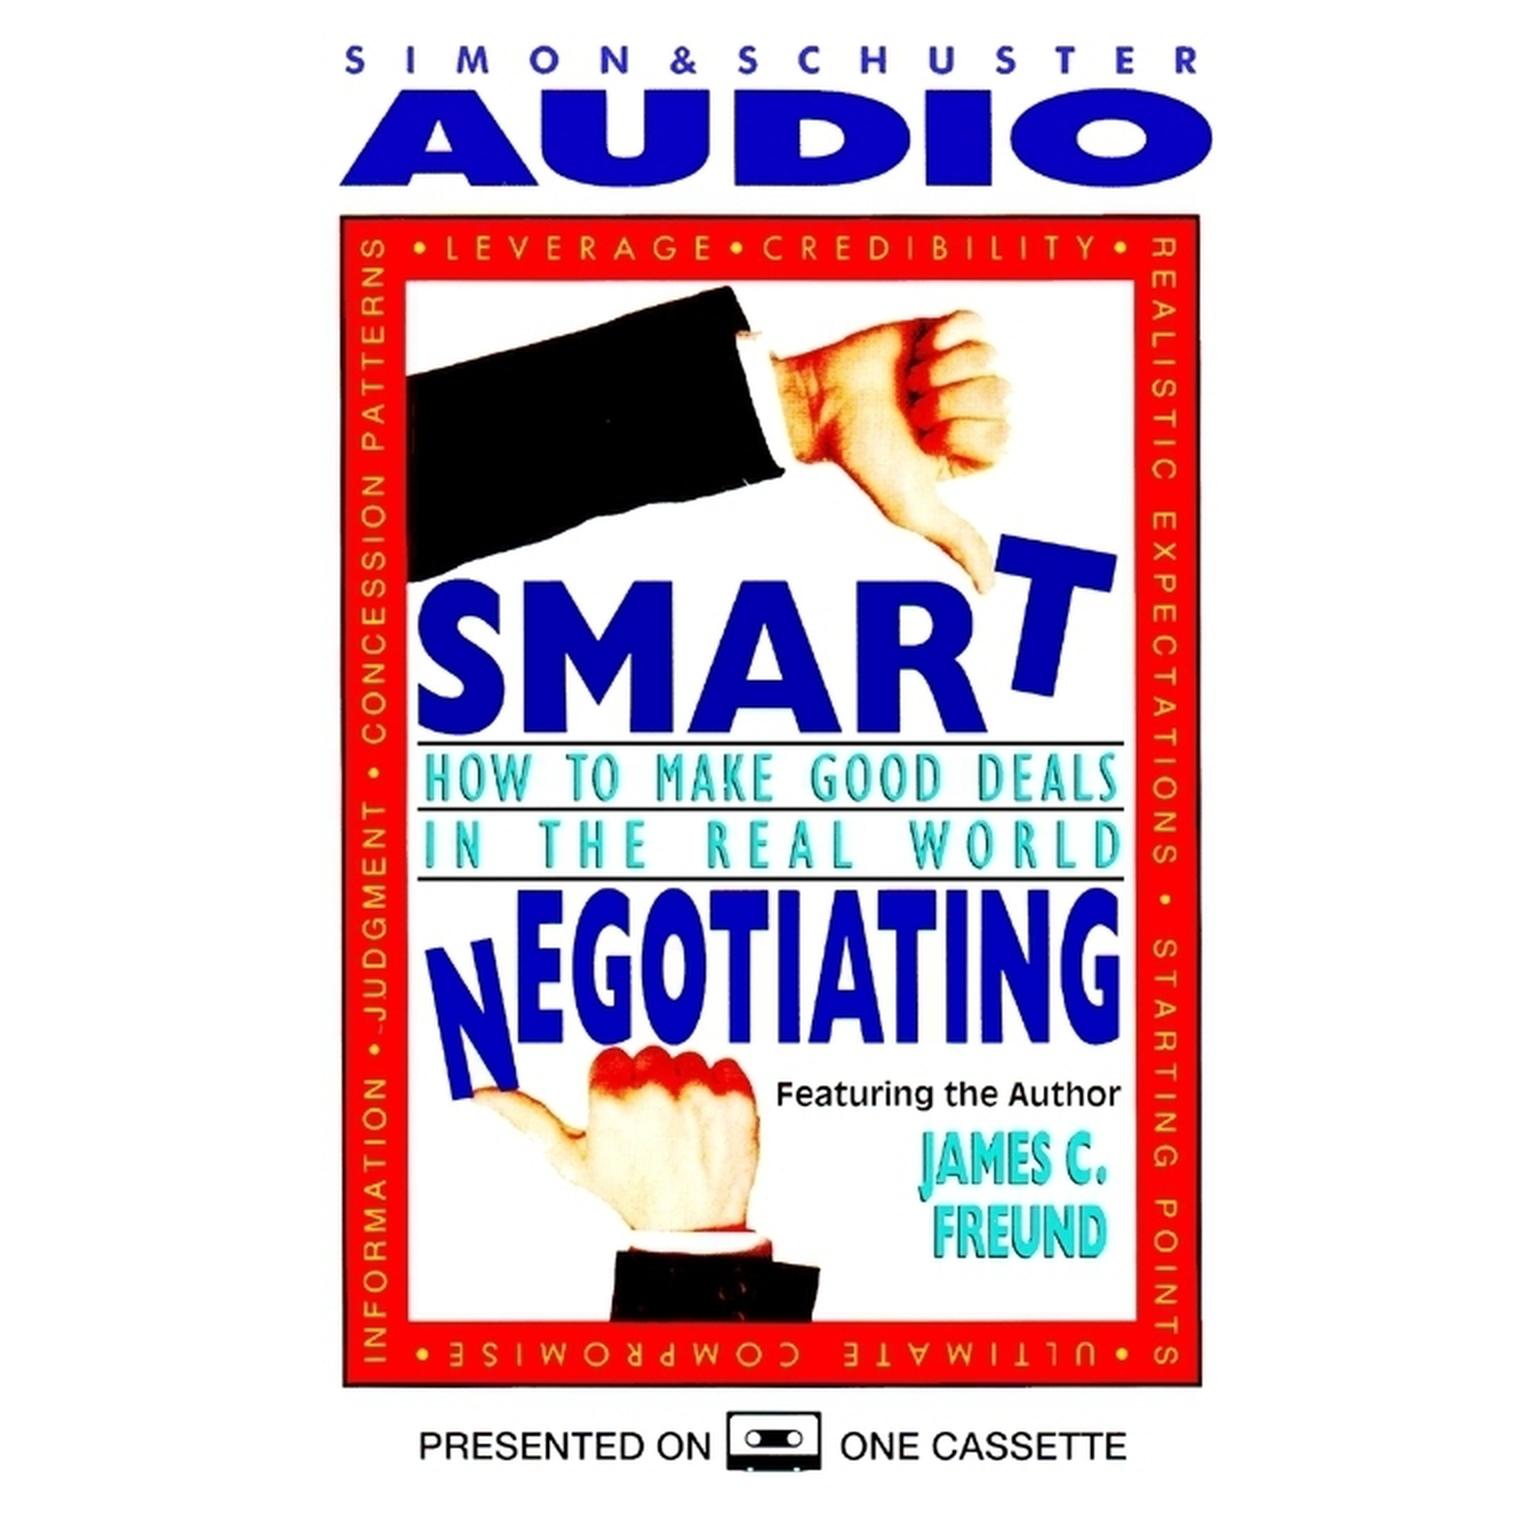 Smart Negotiating (Abridged): How to Make Good Deals in the Real World Audiobook, by James C. Freund